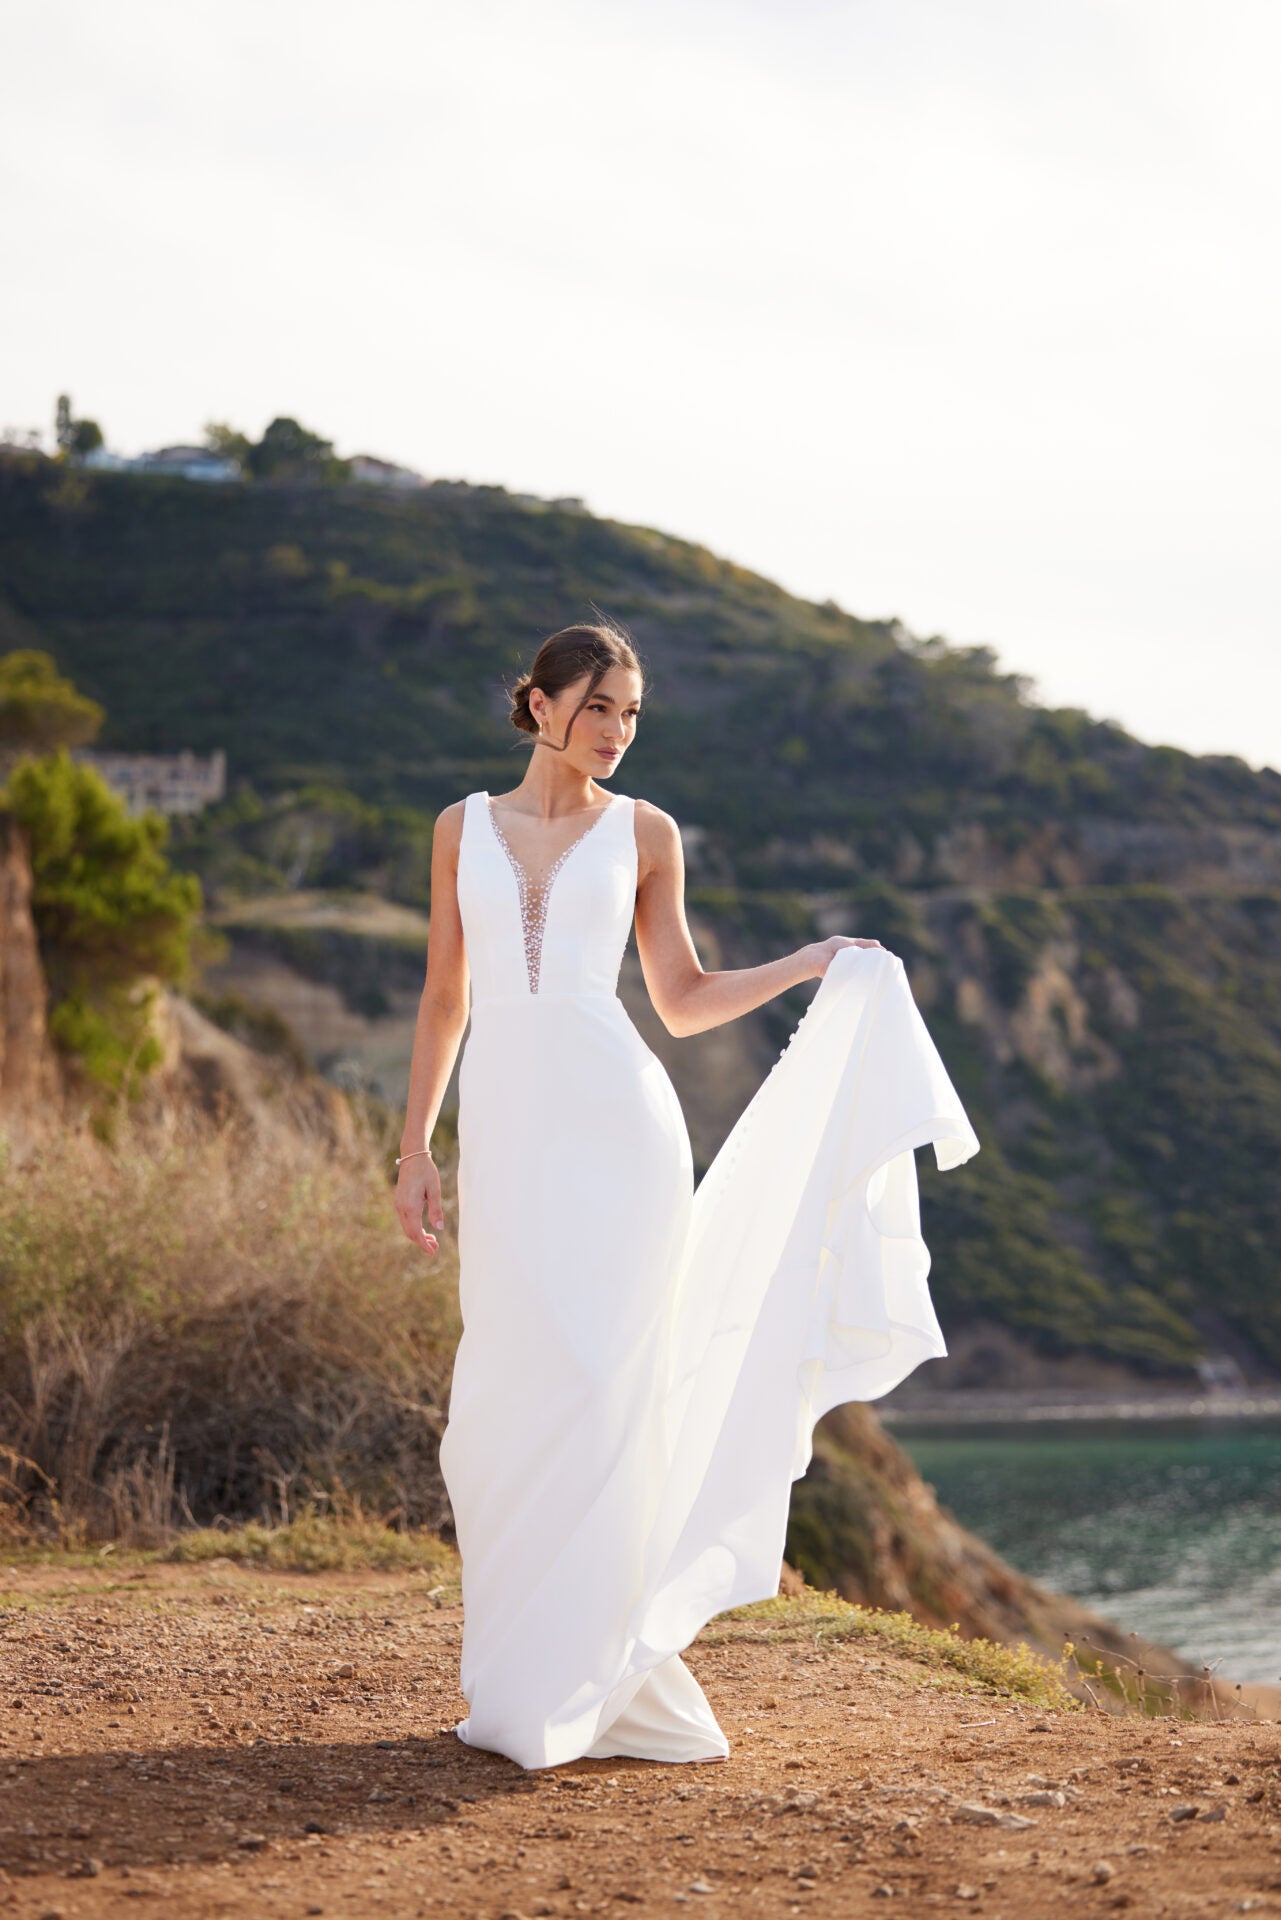 Sleeveless Fit And Flare Wedding Dress With Plunging V-neckline by Essense of Australia - Image 1